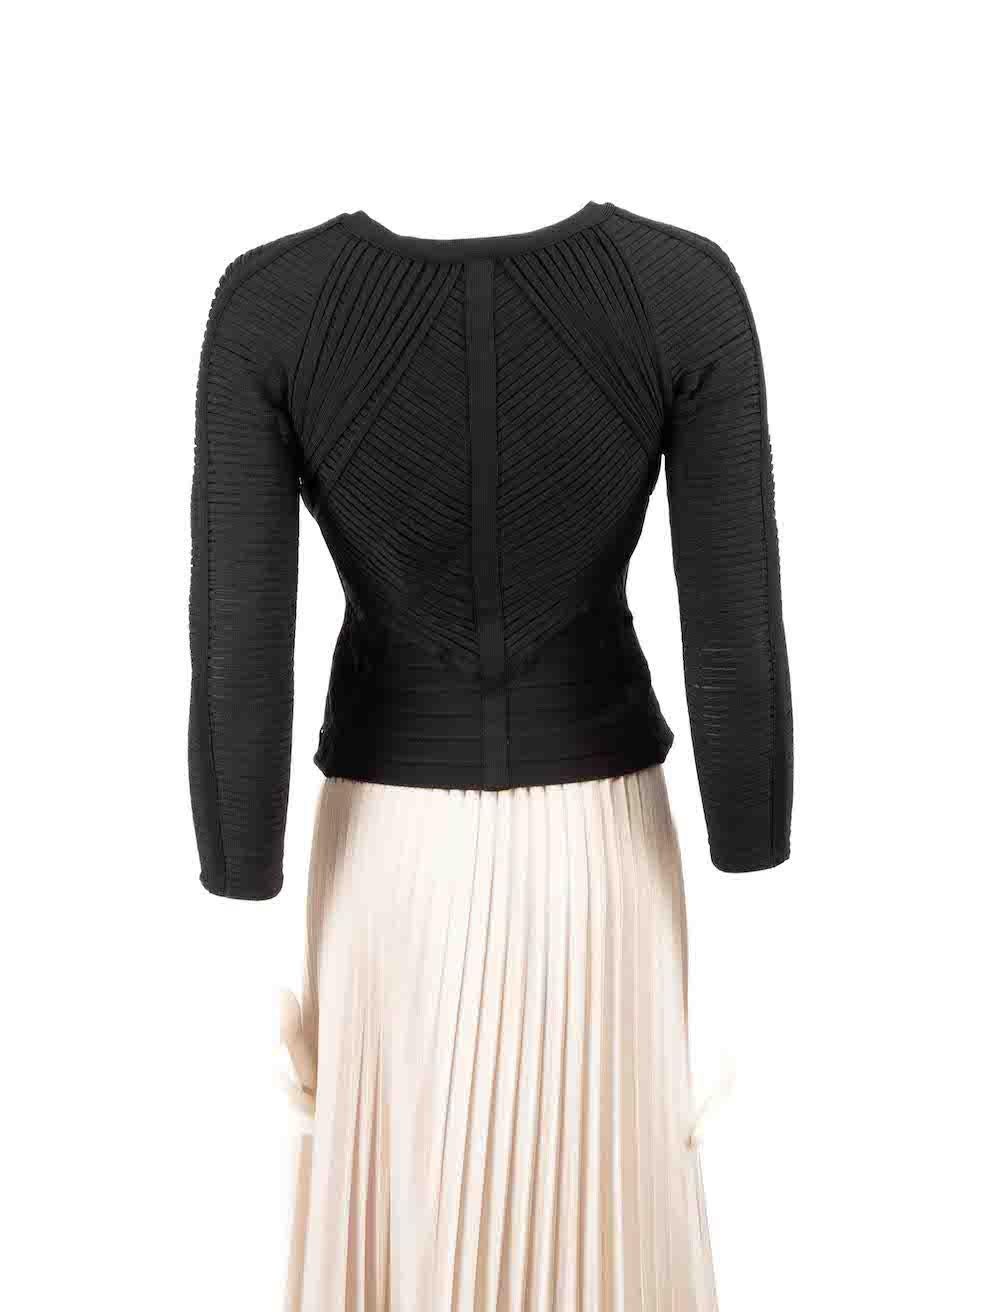 Herve Leger Black Strappy Long Sleeve Top Size XS In Good Condition For Sale In London, GB